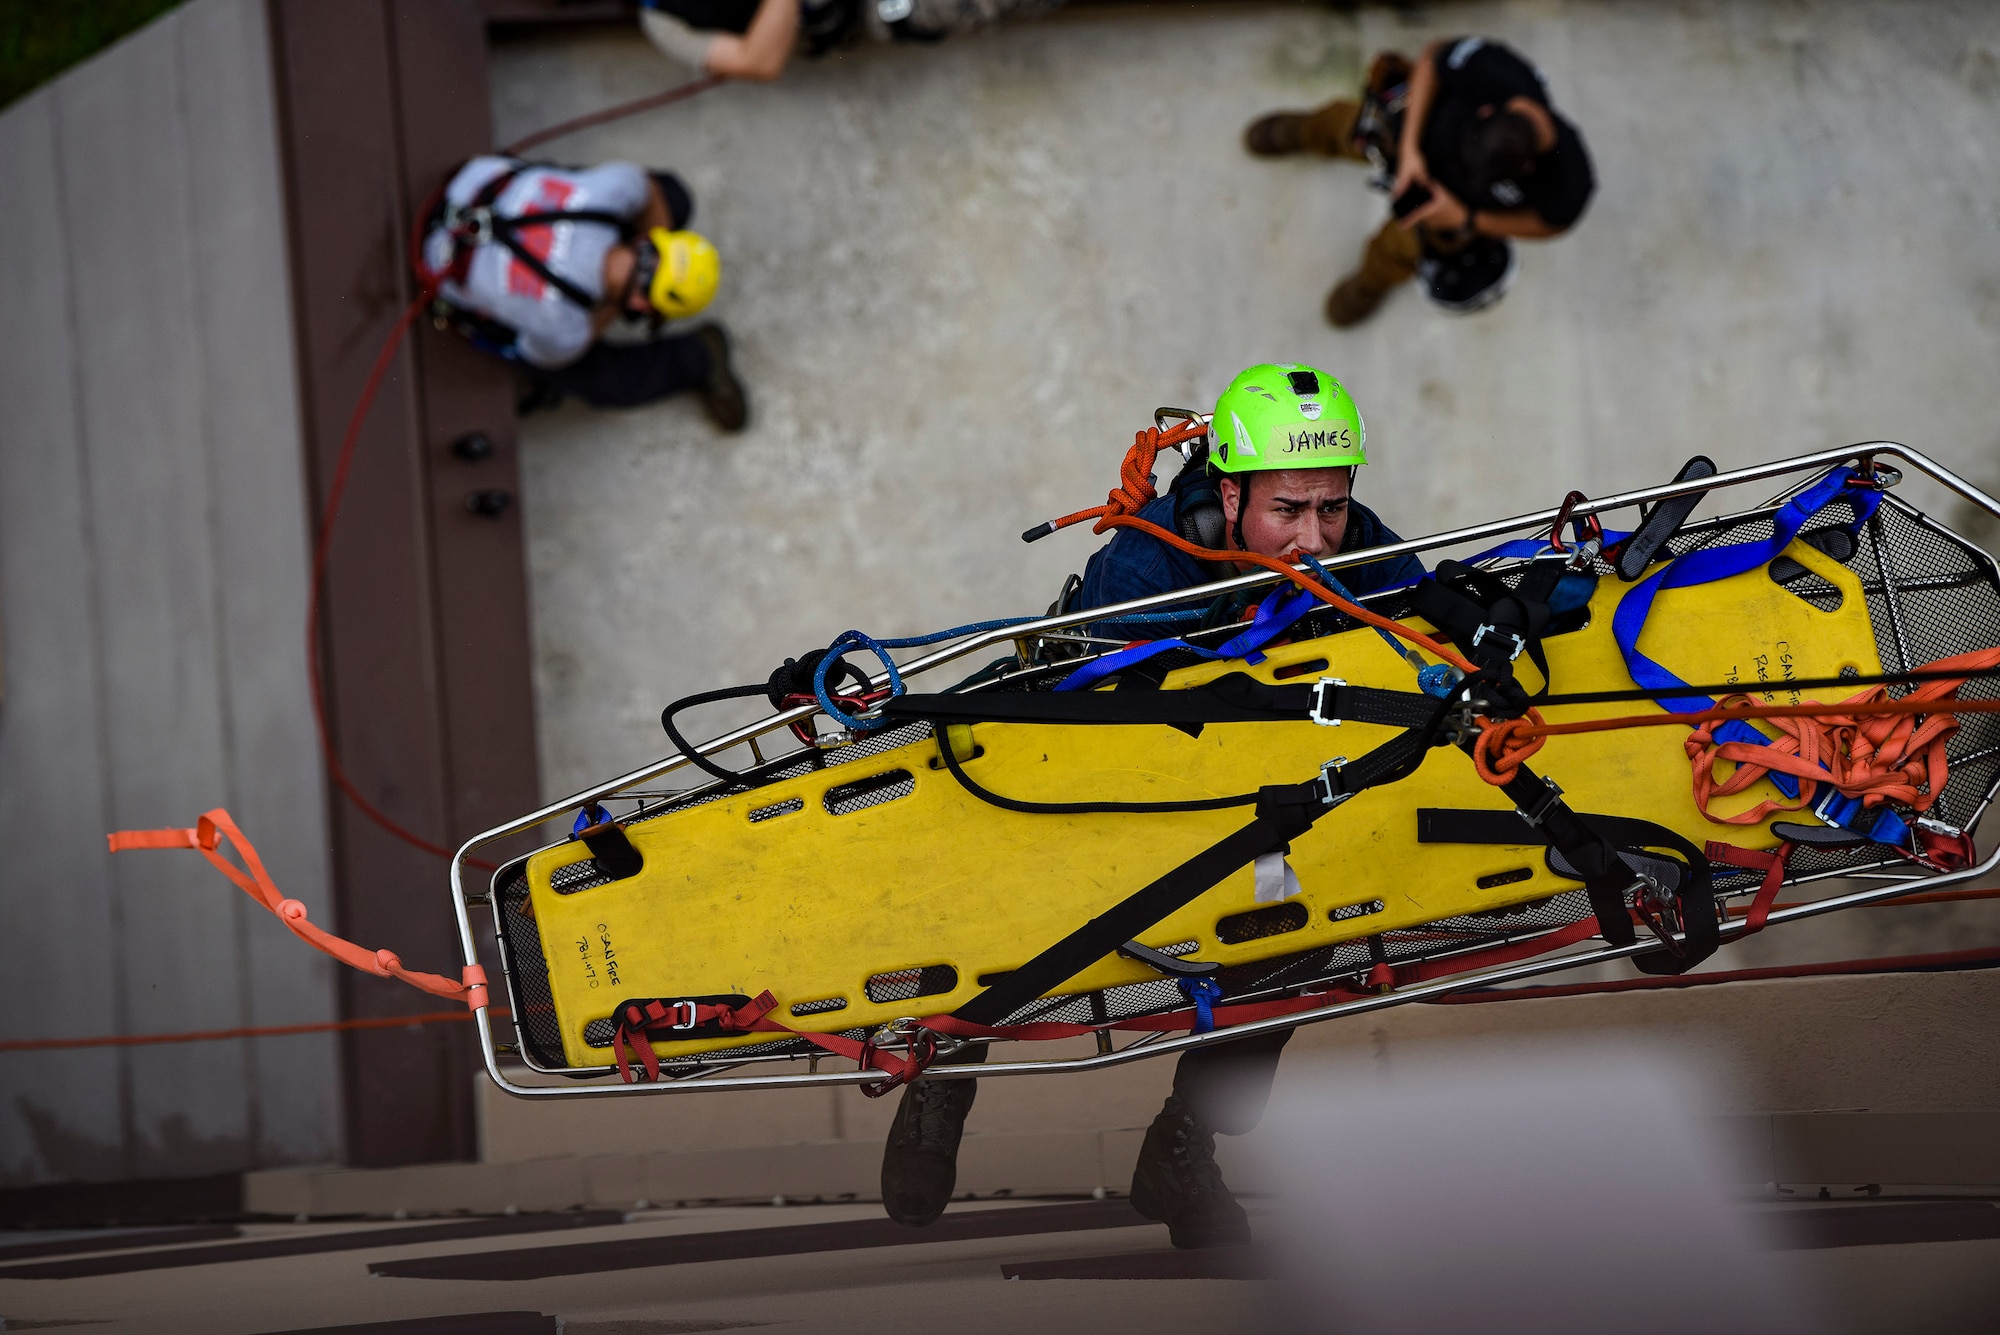 Senior Airman James Selph, 51st Civil Engineer Squadron firefighter, descends an eight-story building to perform a rescue scenario during a Department of Defense Rescue Technician course, Sept. 9, 2019, at Osan Air Base, Republic of Korea. Instructors from Andersen Air Force Base, Guam’s 554th RED HORSE Squadron trained and tested 10 Pacific Air Forces firefighters from three bases on high-risk, elevated and confined space rescue tactics. (U.S. Air Force photo by Staff Sgt. Greg Nash)